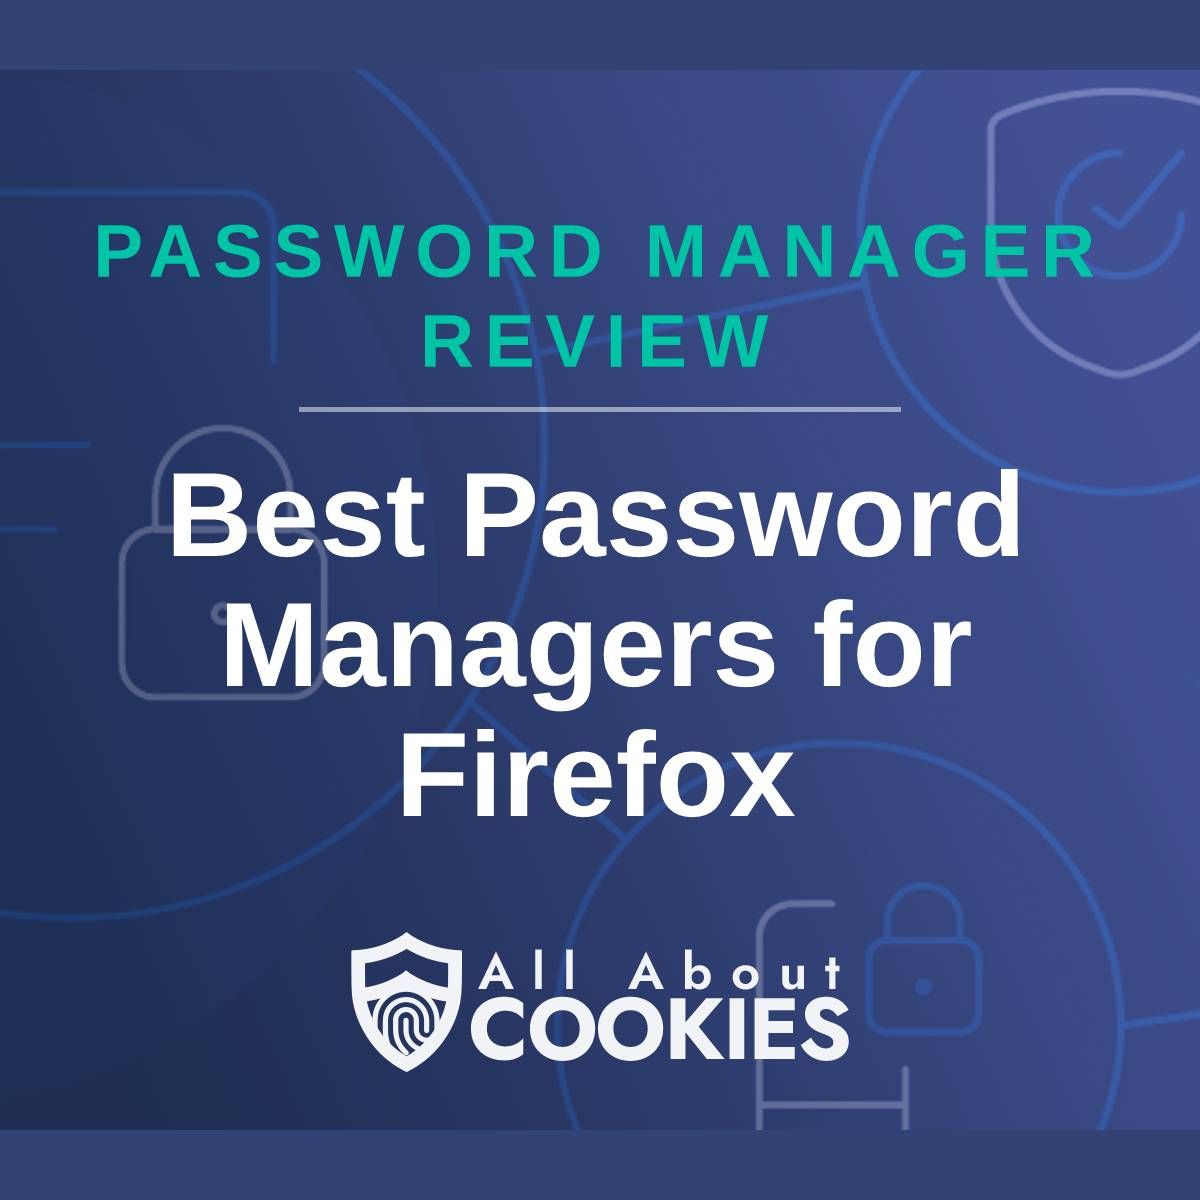 A blue background with images of locks and shields with the text &quot;Password Manager Review Best Password Managers for Firefox&quot; and the All About Cookies logo. 